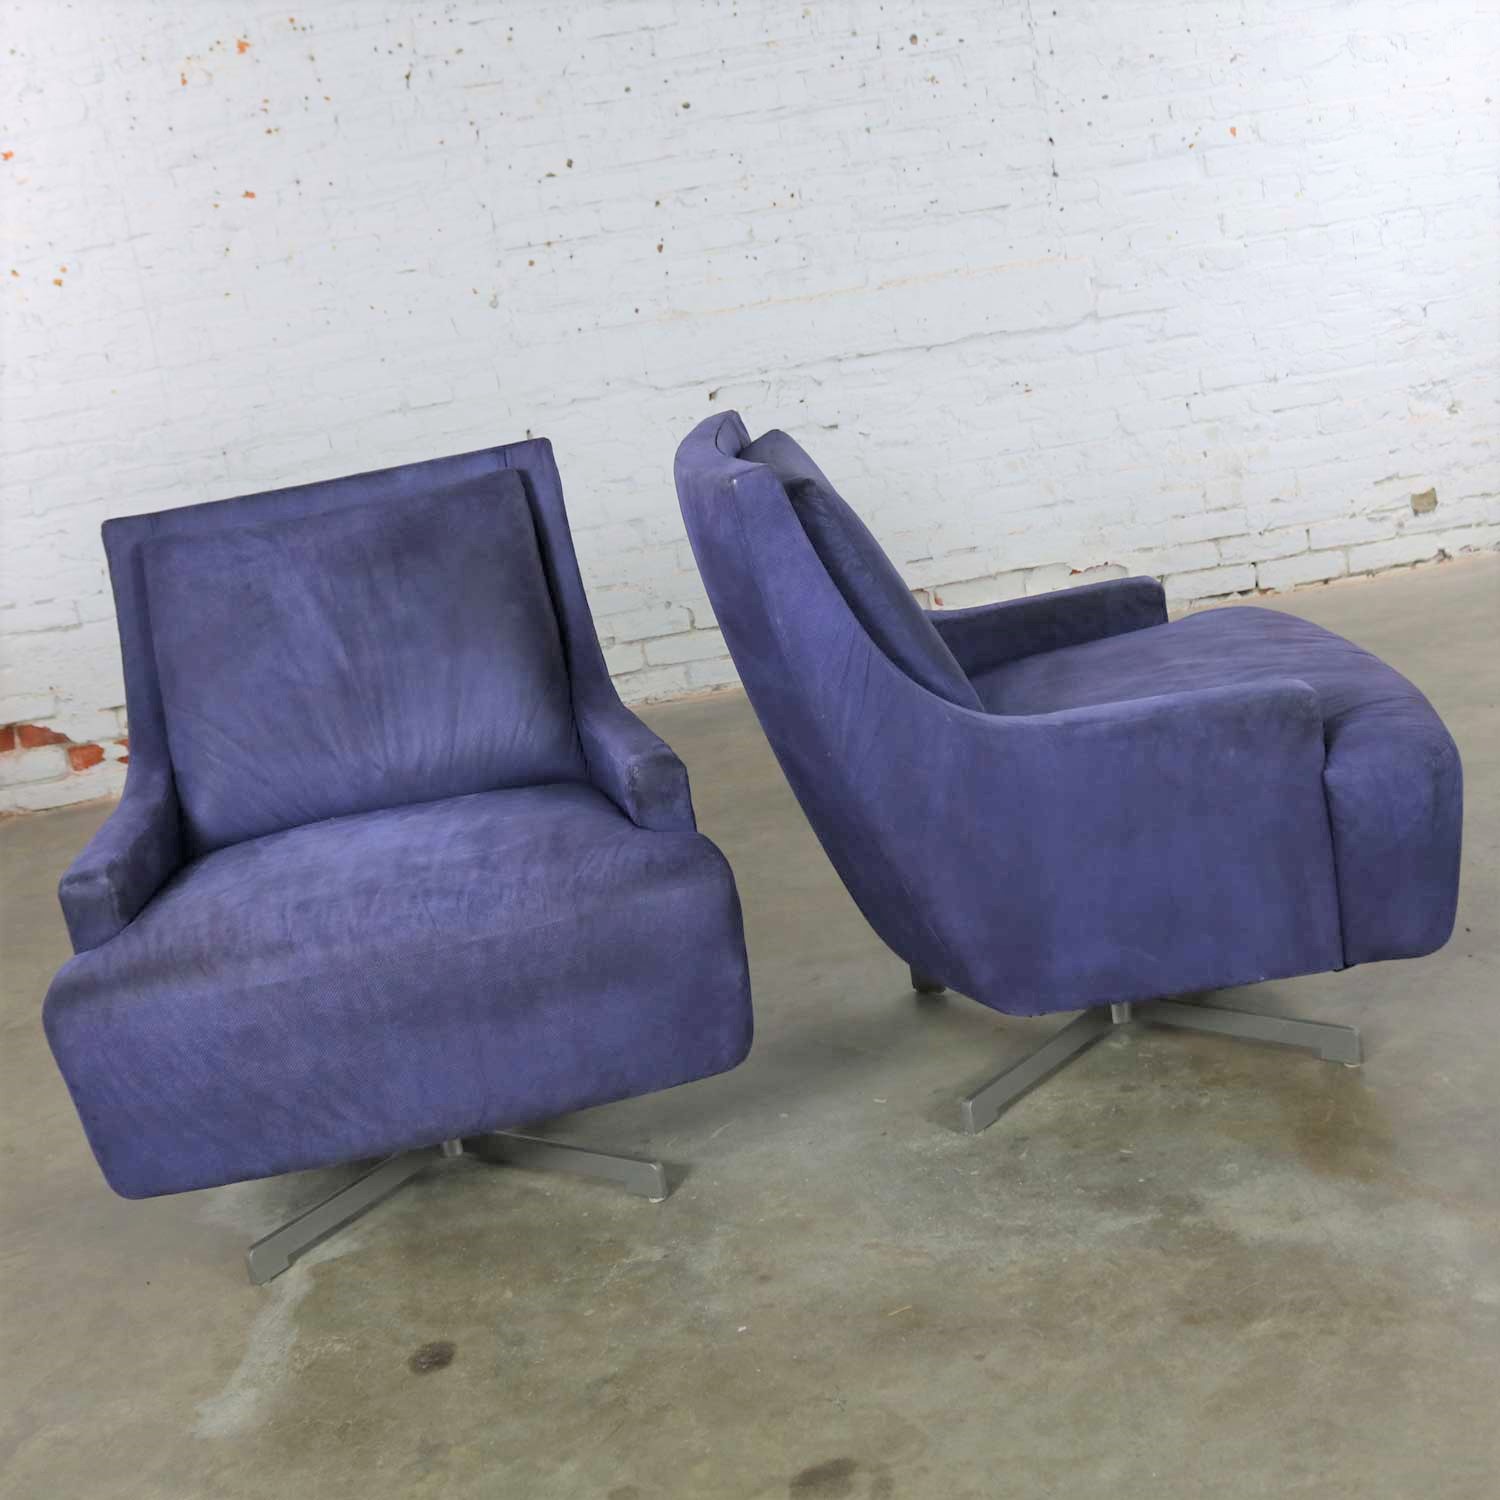 Pair of Aubergine Scoop Swivel Lounge Chairs with Metal Base by Barbara Barry for HBF